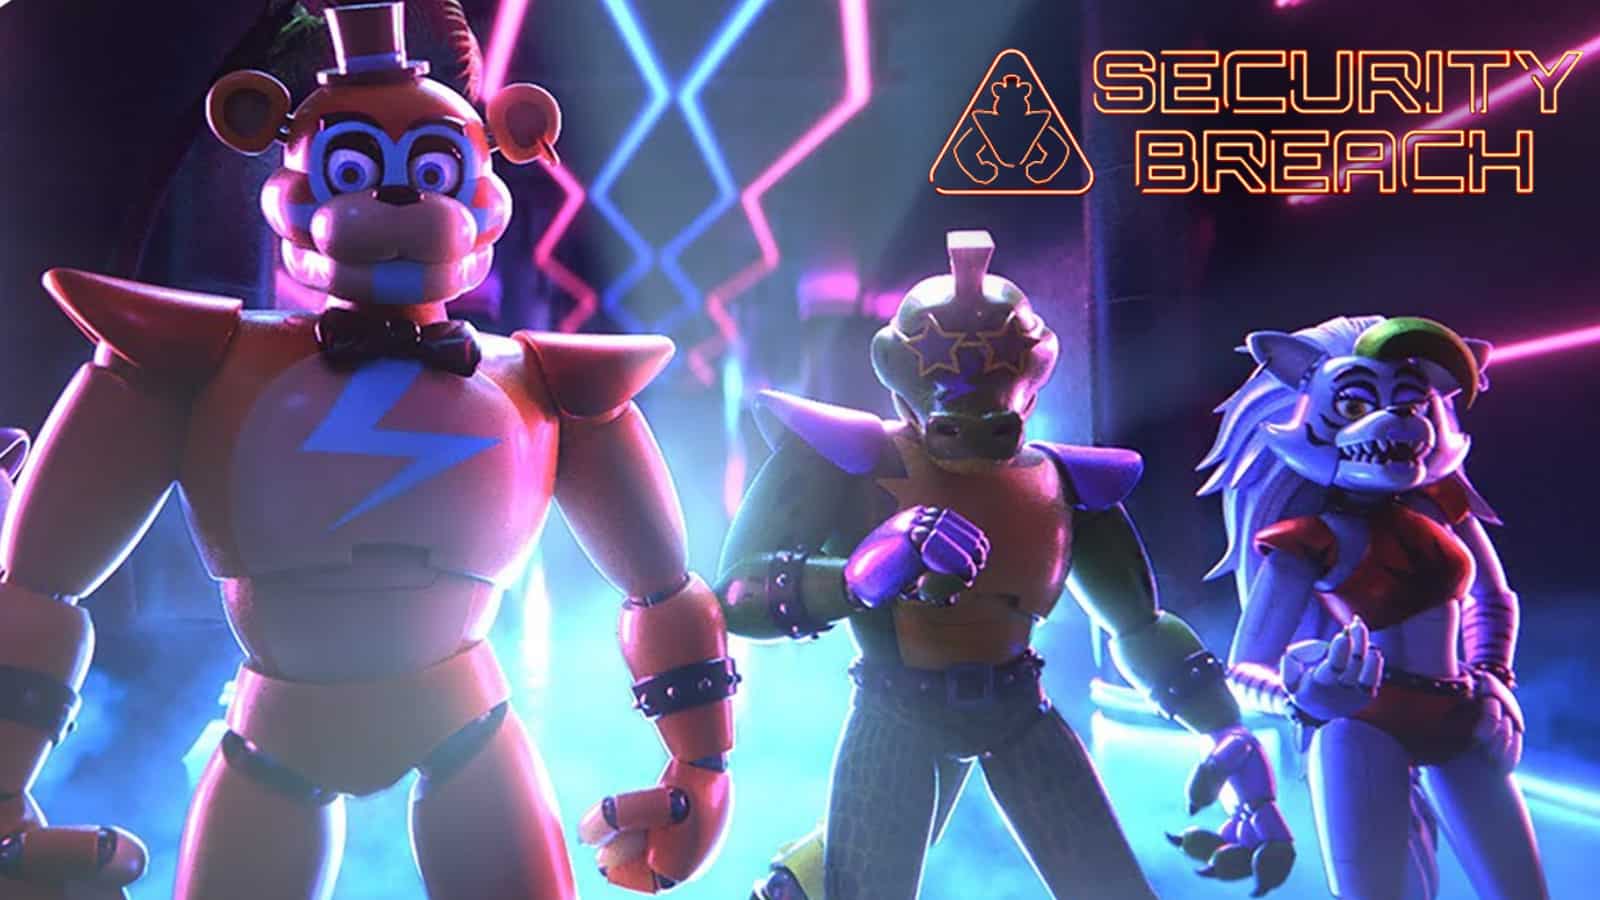 Garebearart on Twitter There will be more Five Nights At Freddys Security  Breach Wallpapers with each characters soon so yeah just to let yall know  SteelWoolStudio realscawthon 5naf fnaf fivenightsatfreddys  fnafsecuritybreach httpstco 